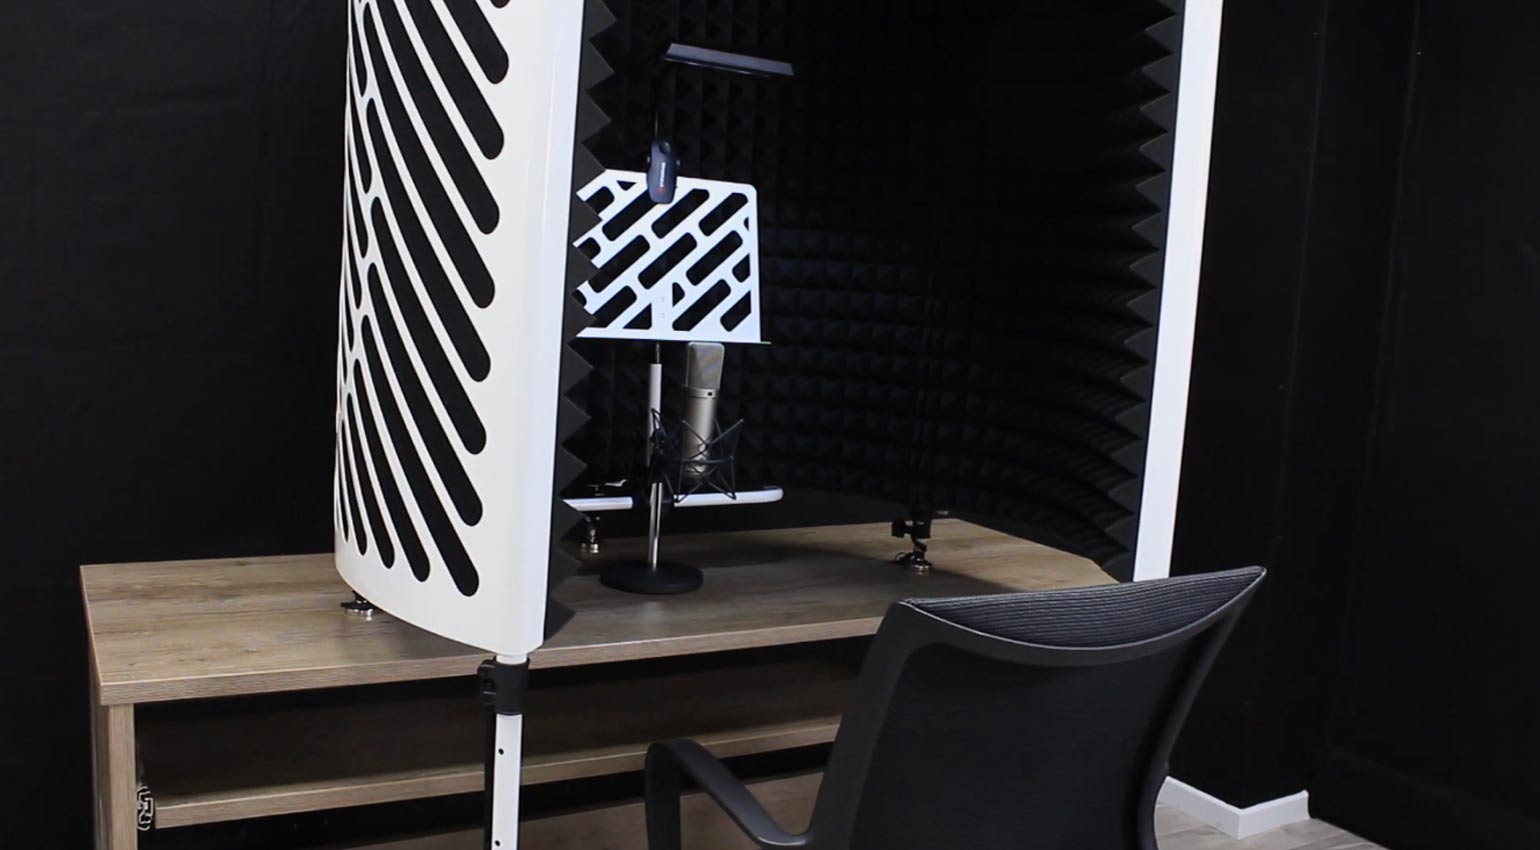 Imperative Audio PVB Portable Vocal Booth